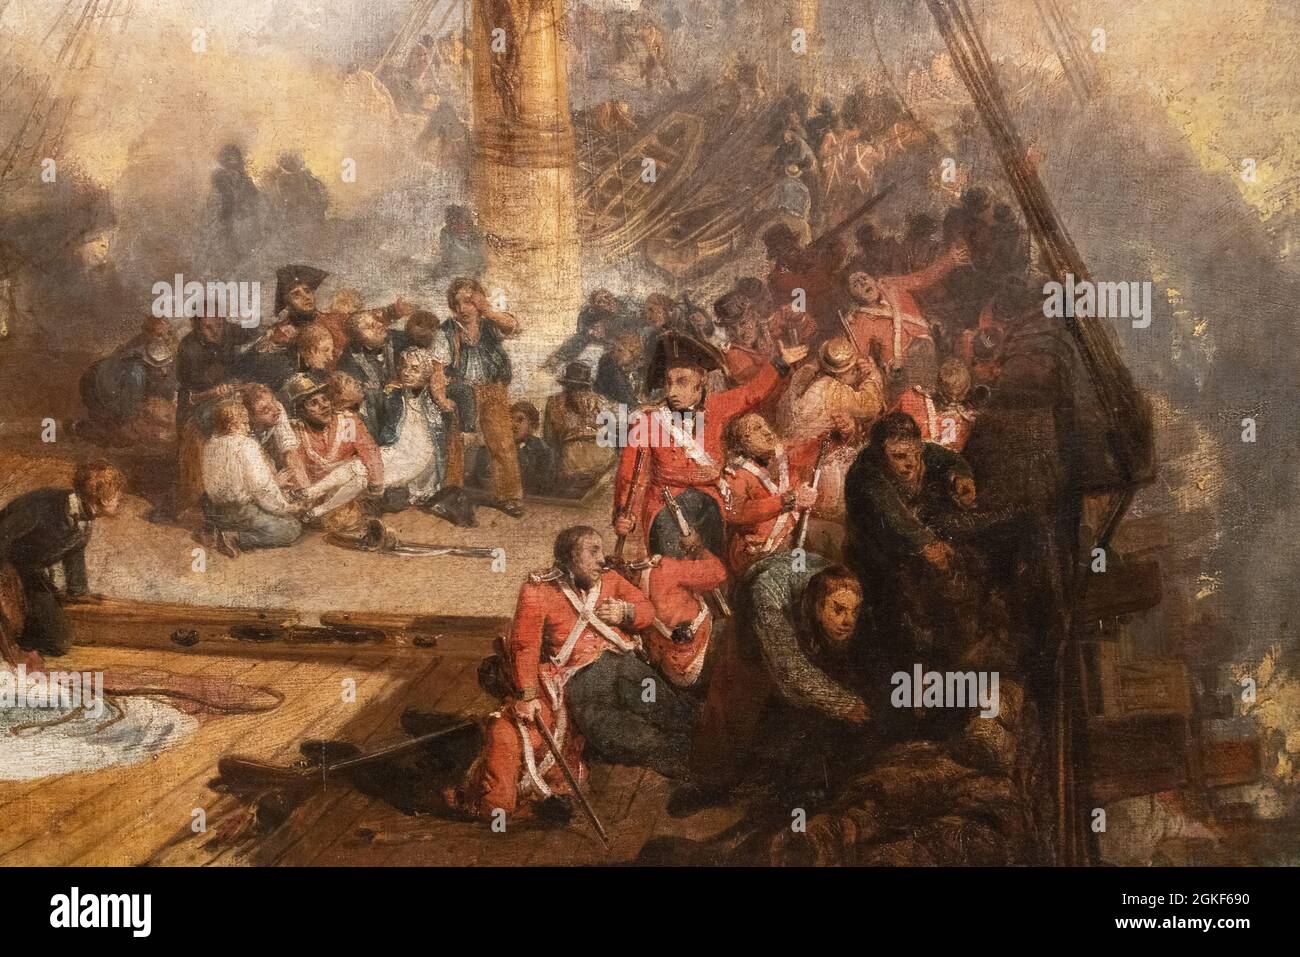 Detail close up; JMW Turner painting, 'The Battle of Trafalgar, as Seen from the Mizen Starboard Shrouds of the Victory', the Death of Nelson, Stock Photo